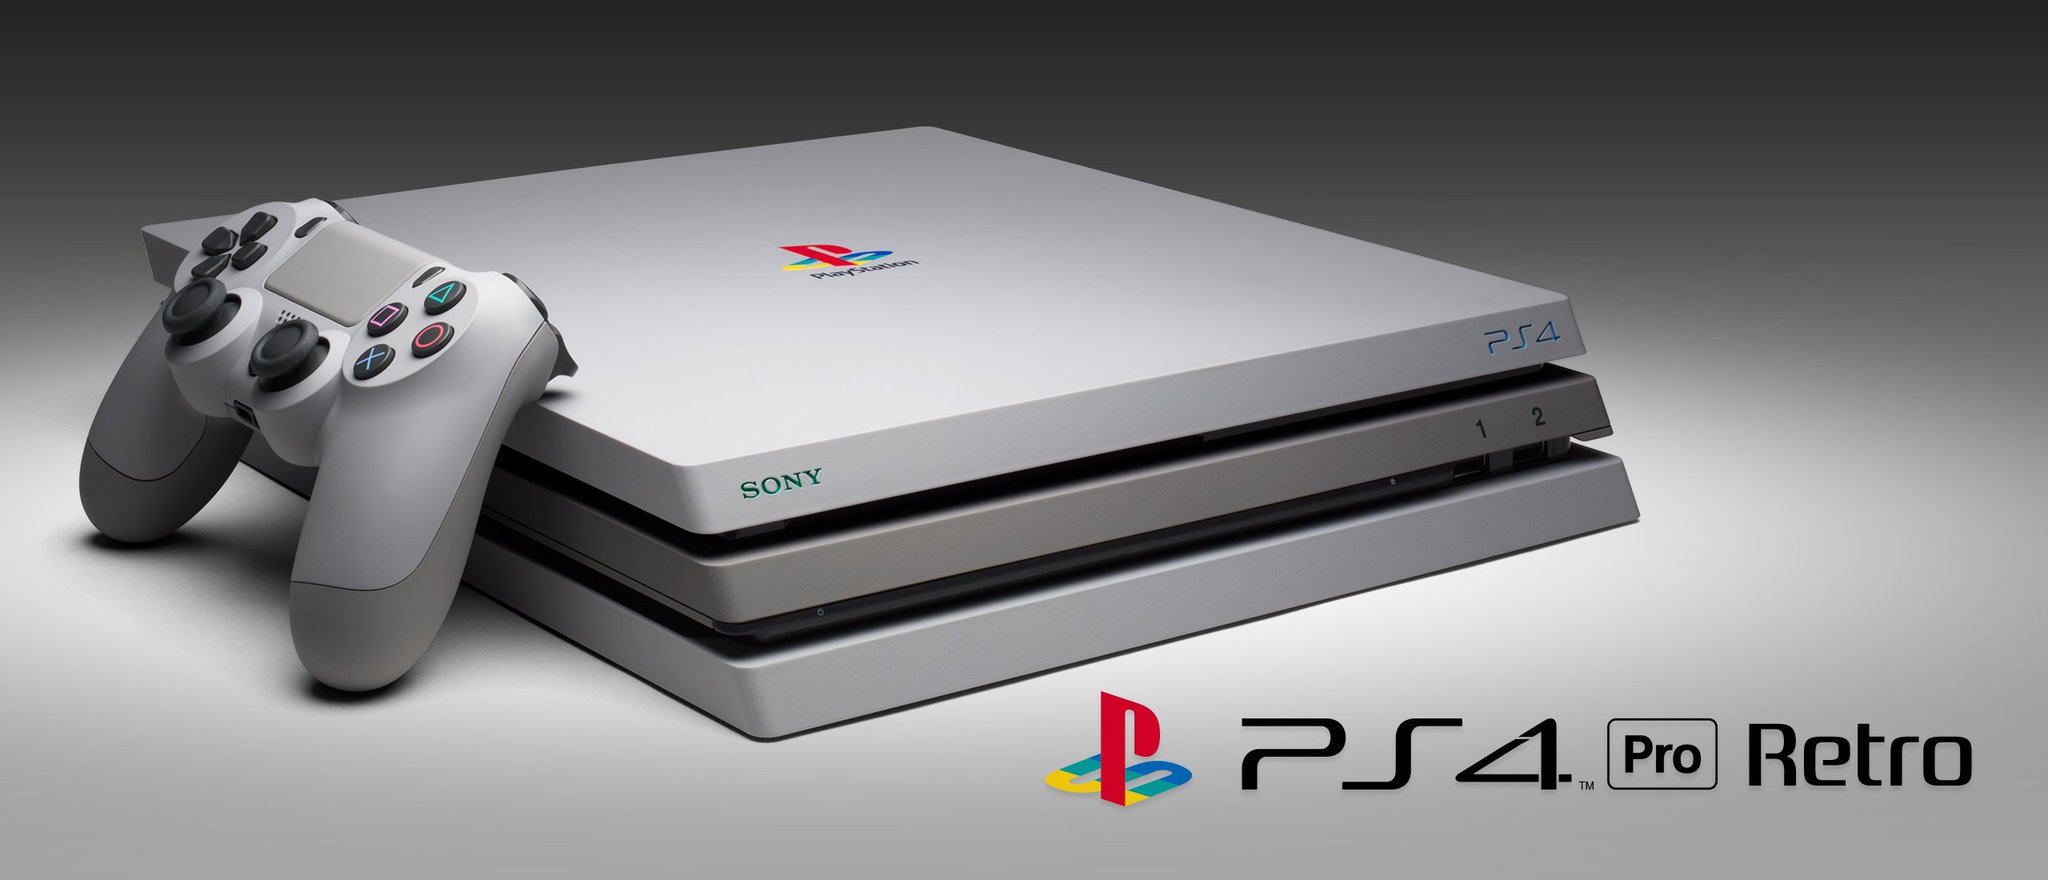 eksotisk liner Tilsyneladende ColorWare on Twitter: "Yes we just made the PS4 Pro #Retro a real thing:  https://t.co/hnwqNyrQrU Custom painted and branded to match the original!  https://t.co/Vr4gtJNY8G" / X